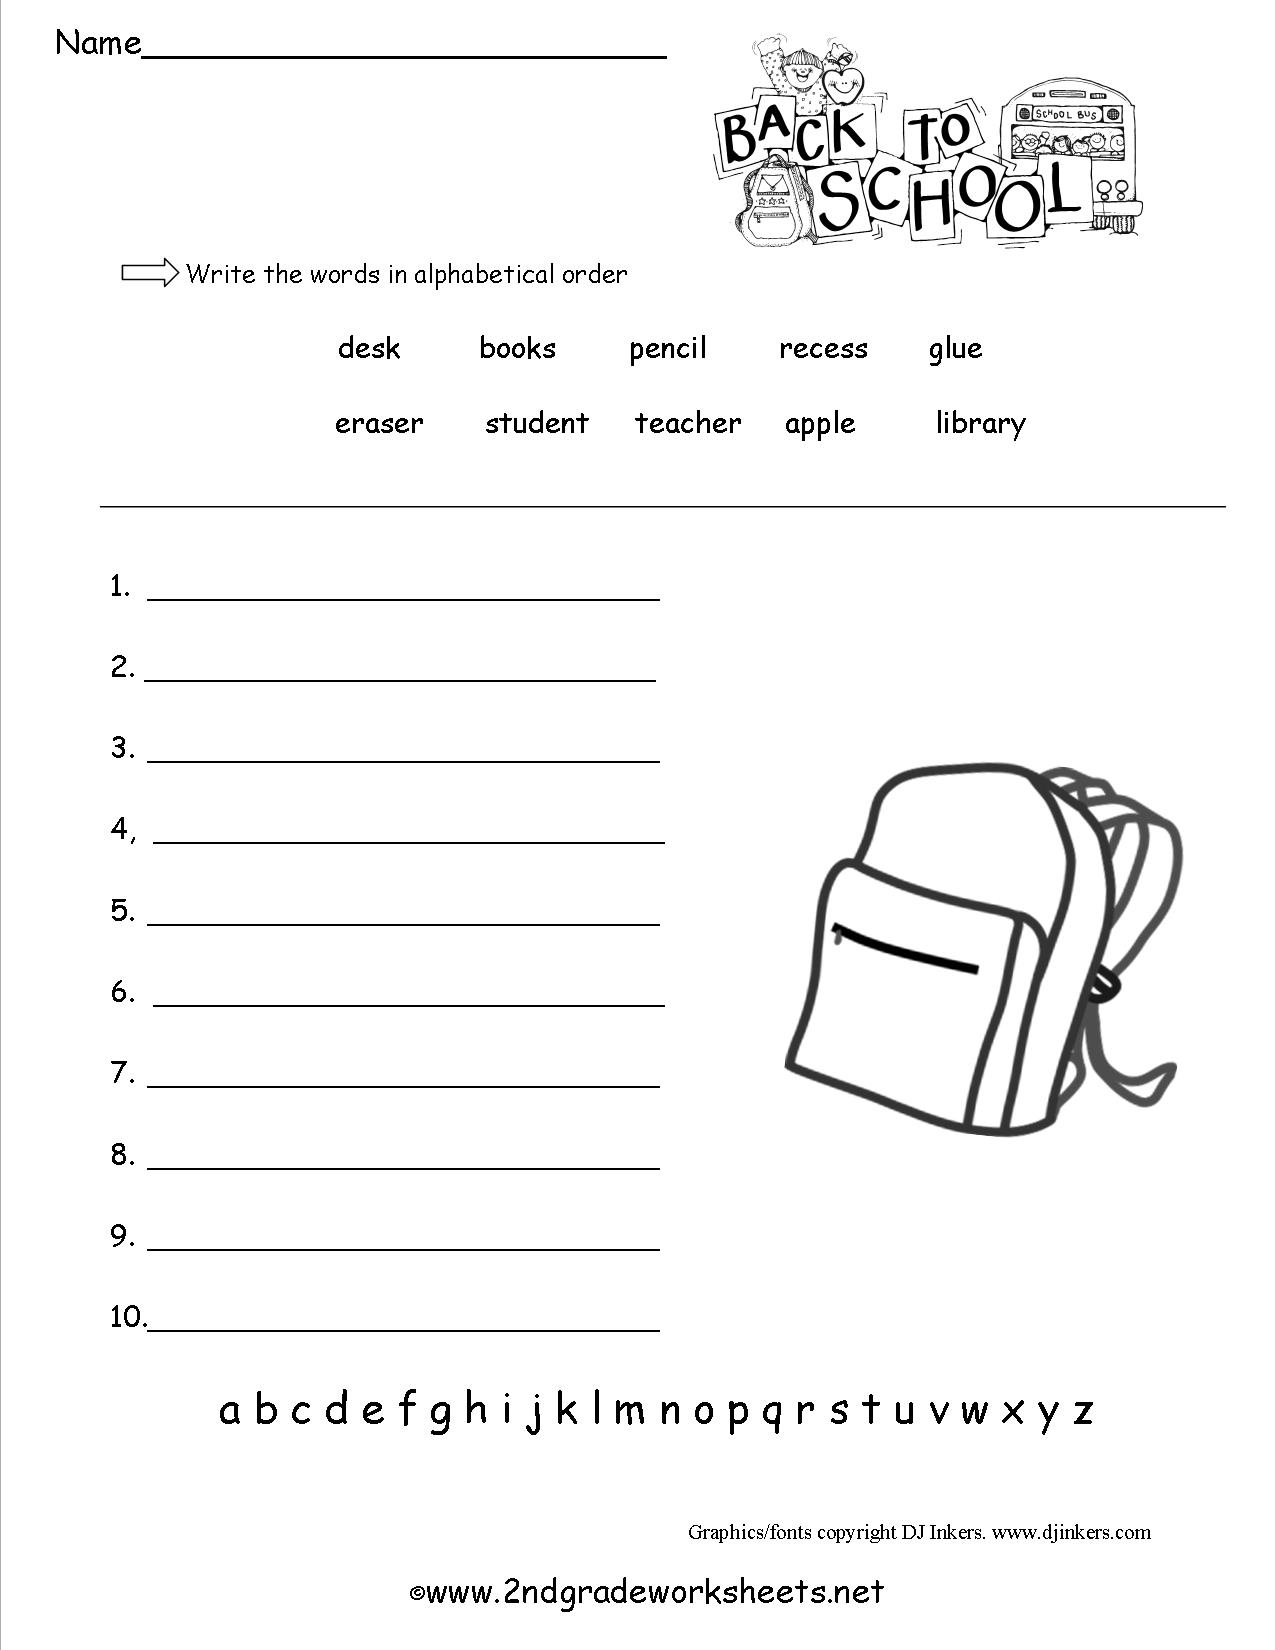 5-best-images-of-back-to-school-printable-activities-back-to-school-printable-worksheets-back